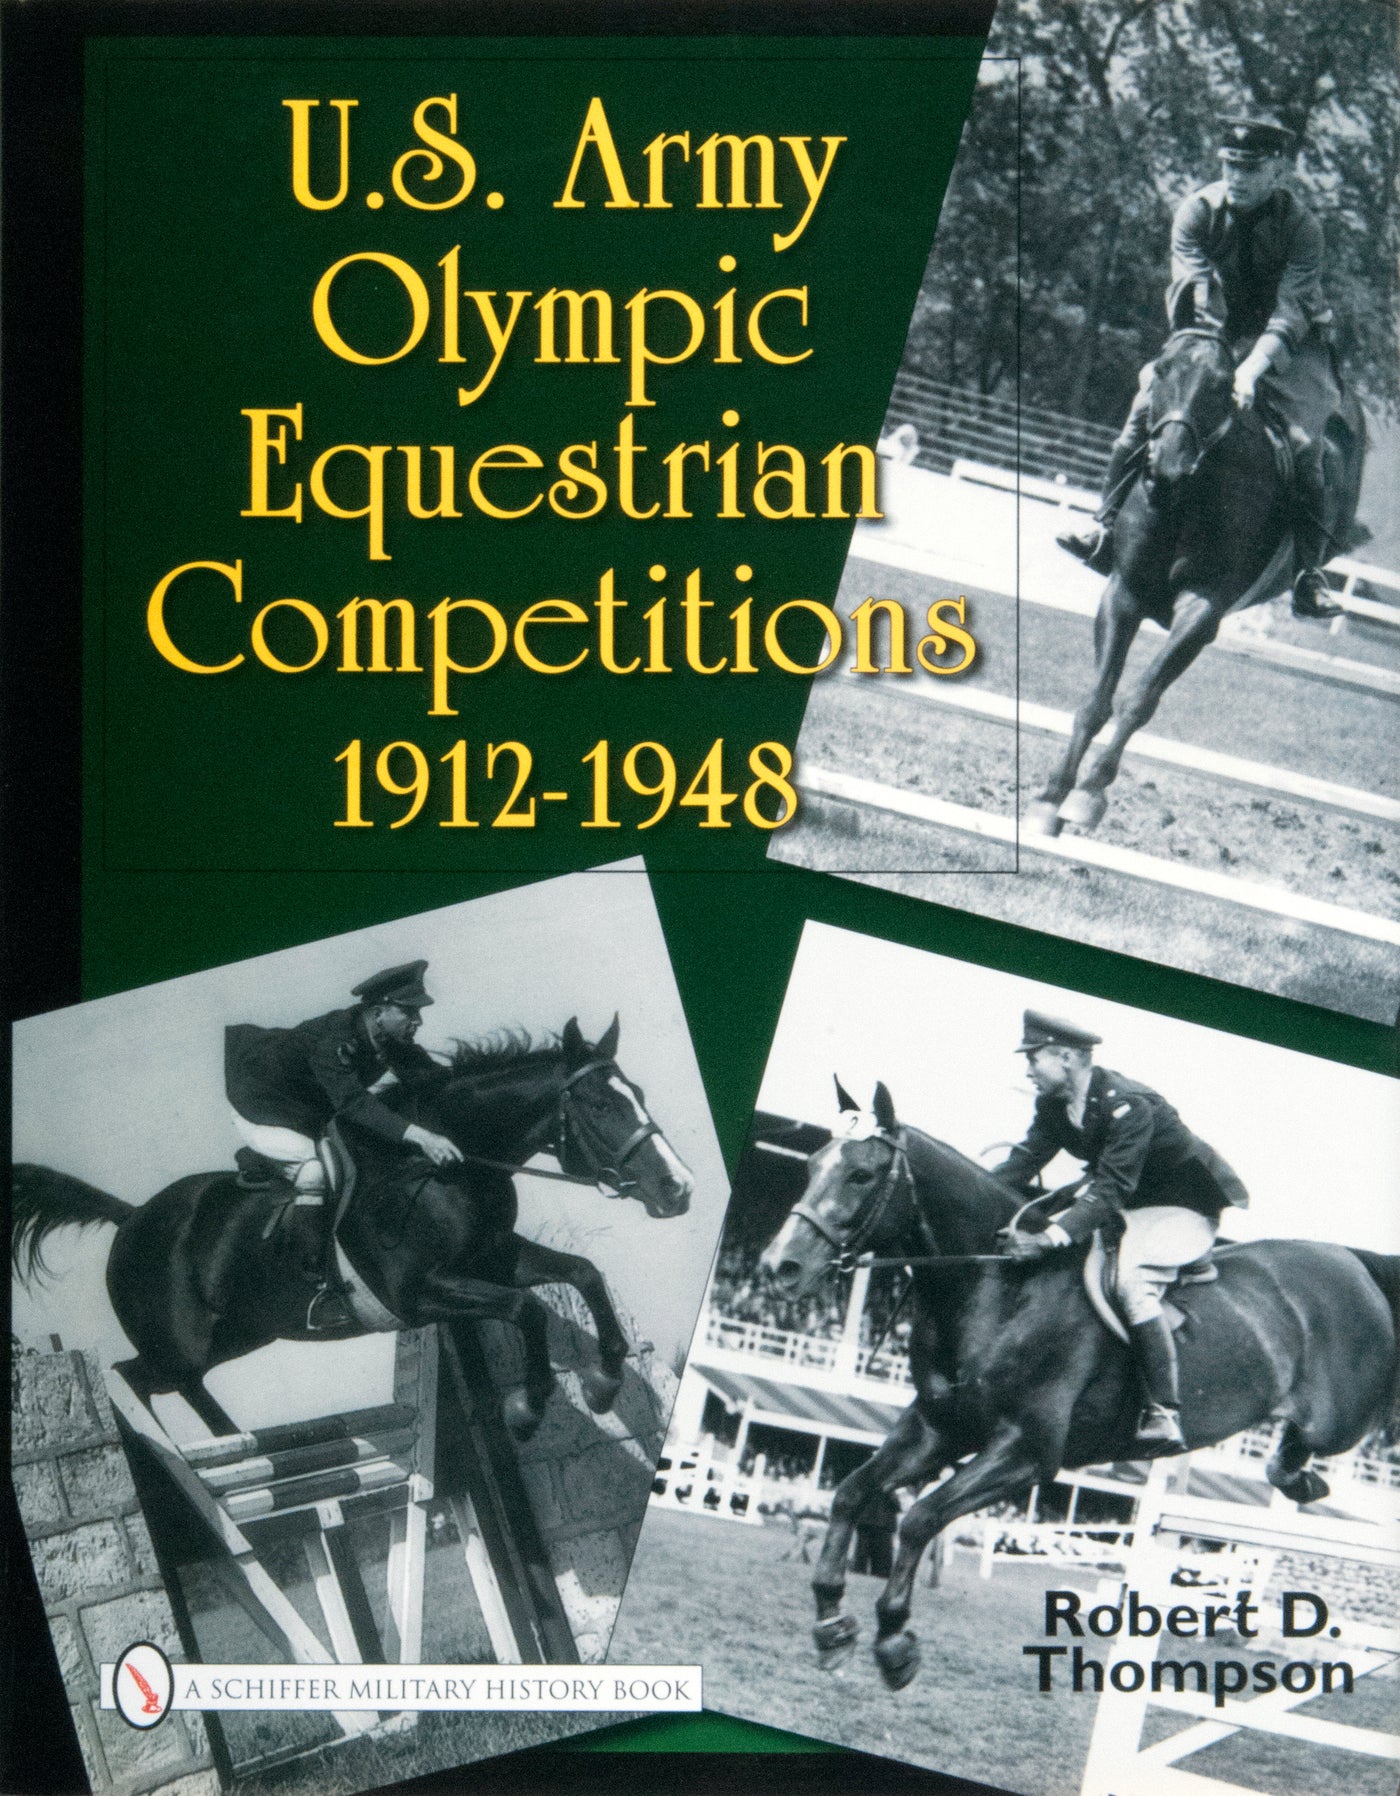 U.S. Army Olympic Equestrian Competitions 1912-1948